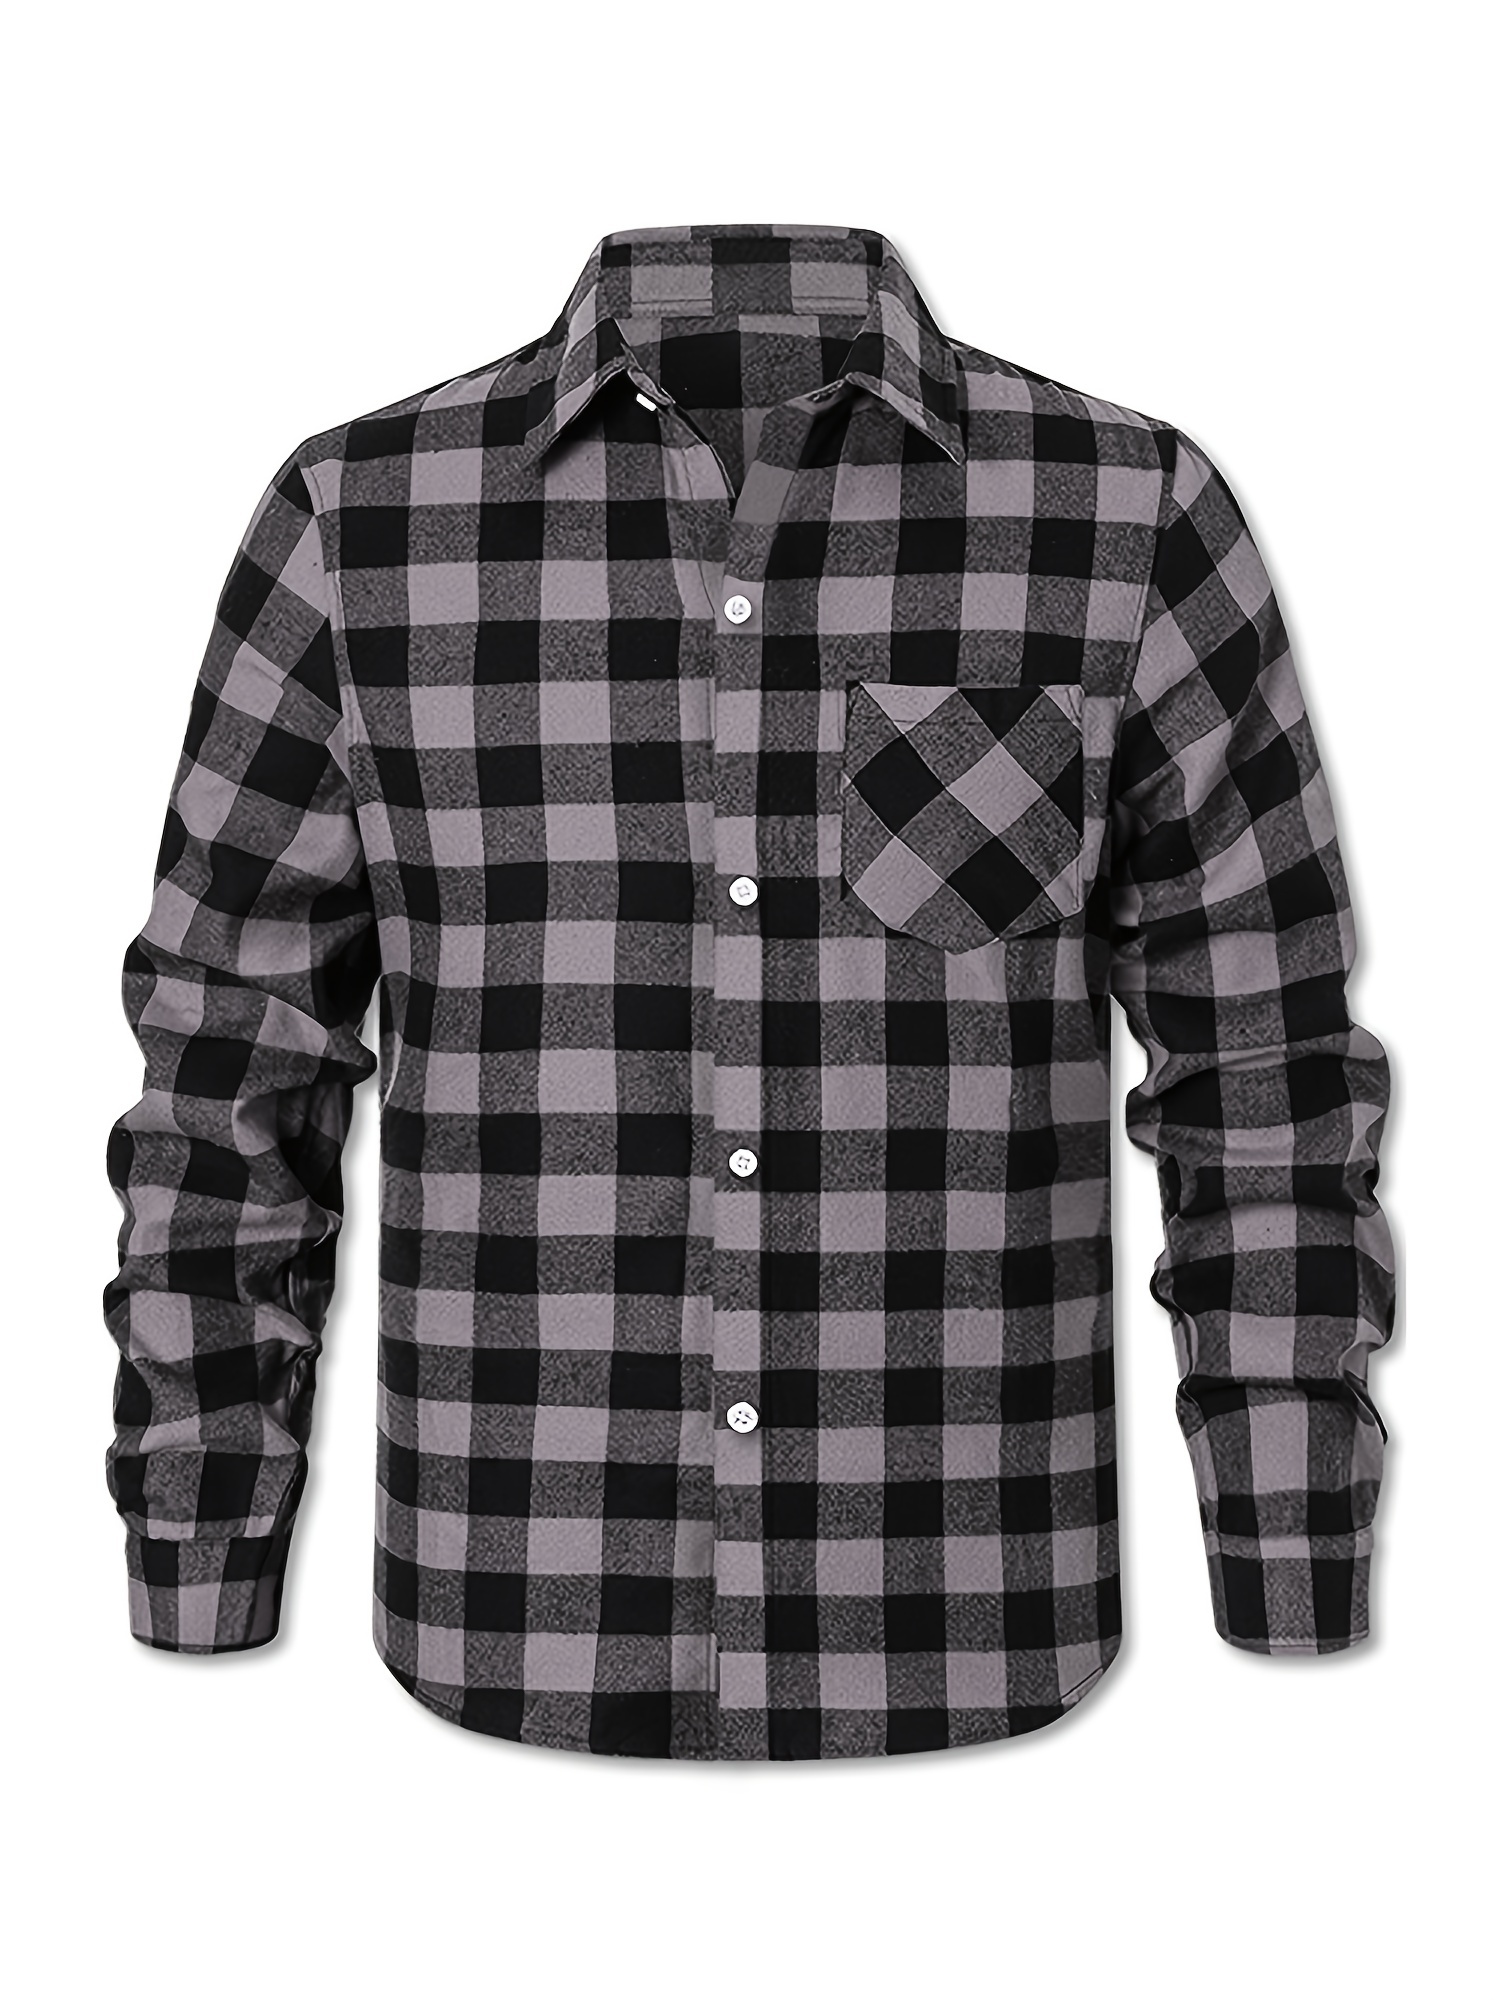 Classic Plaid Print Men's Casual Button Up Long Sleeve Shirt With